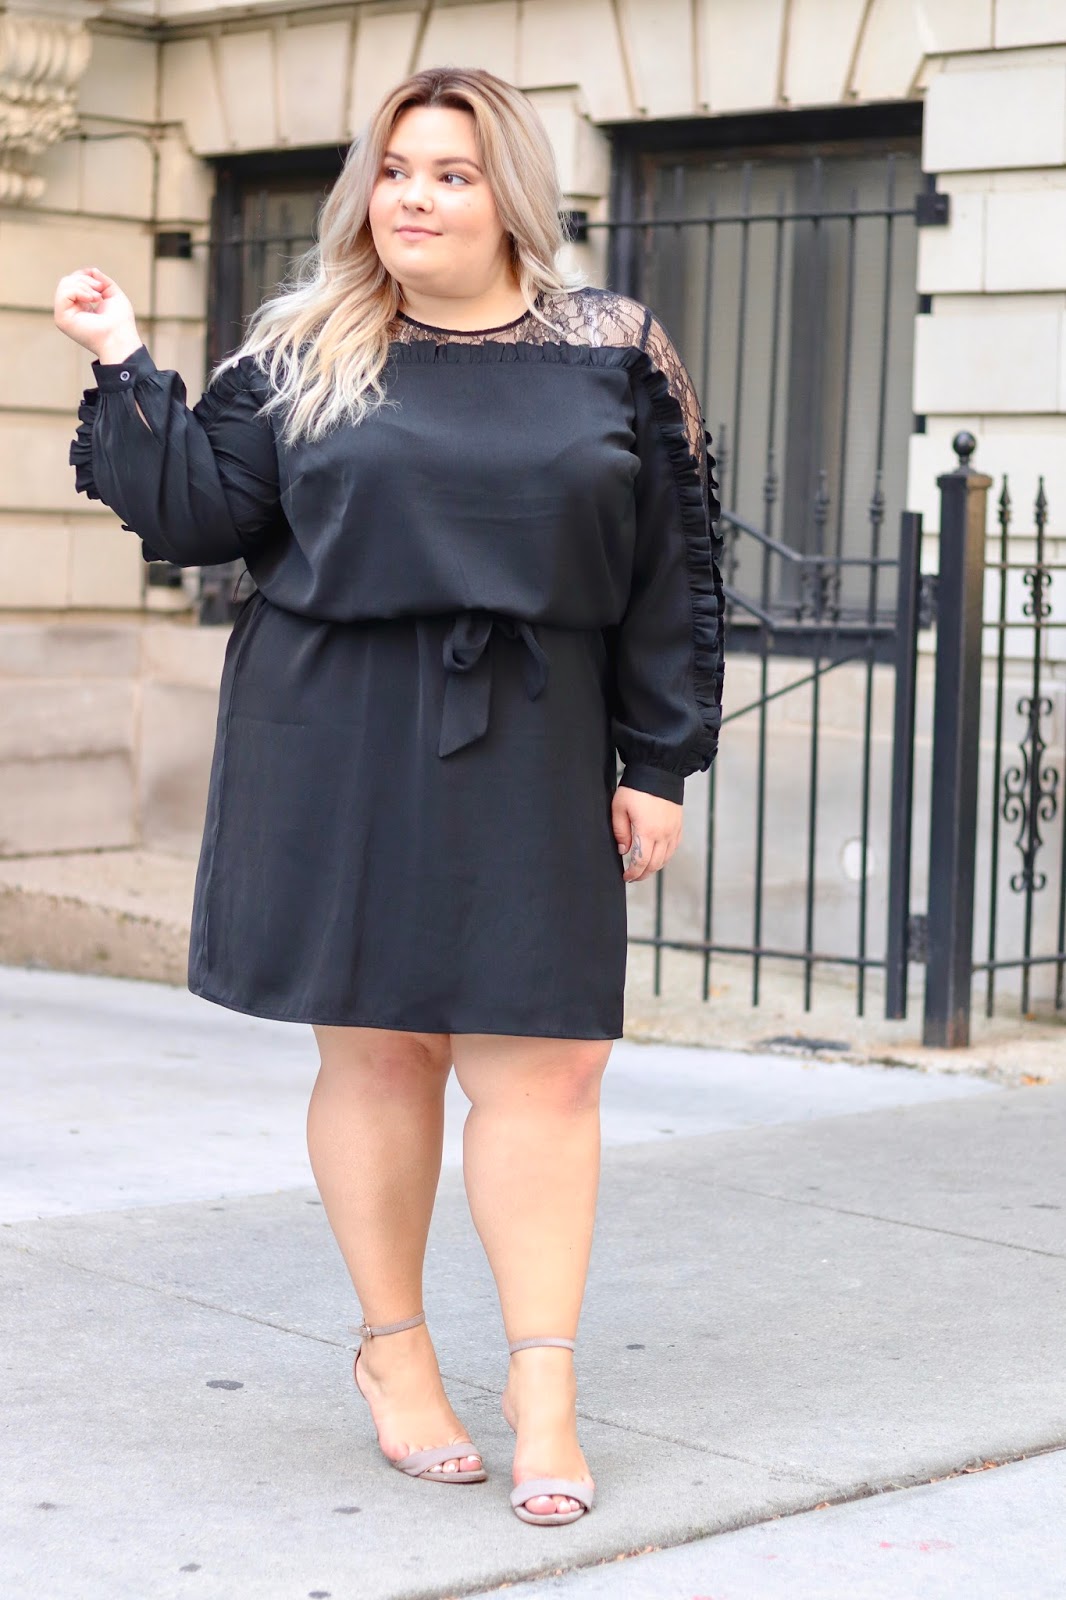 plus size fashion, plus size fashion blogger, Chicago blogger, natalie in the city, eloquii, the shops at Northbridge, eloquii Chicago, plus size dresses for work, plus size office outfits, affordable plus size clothing, curves and confidence, fatshion